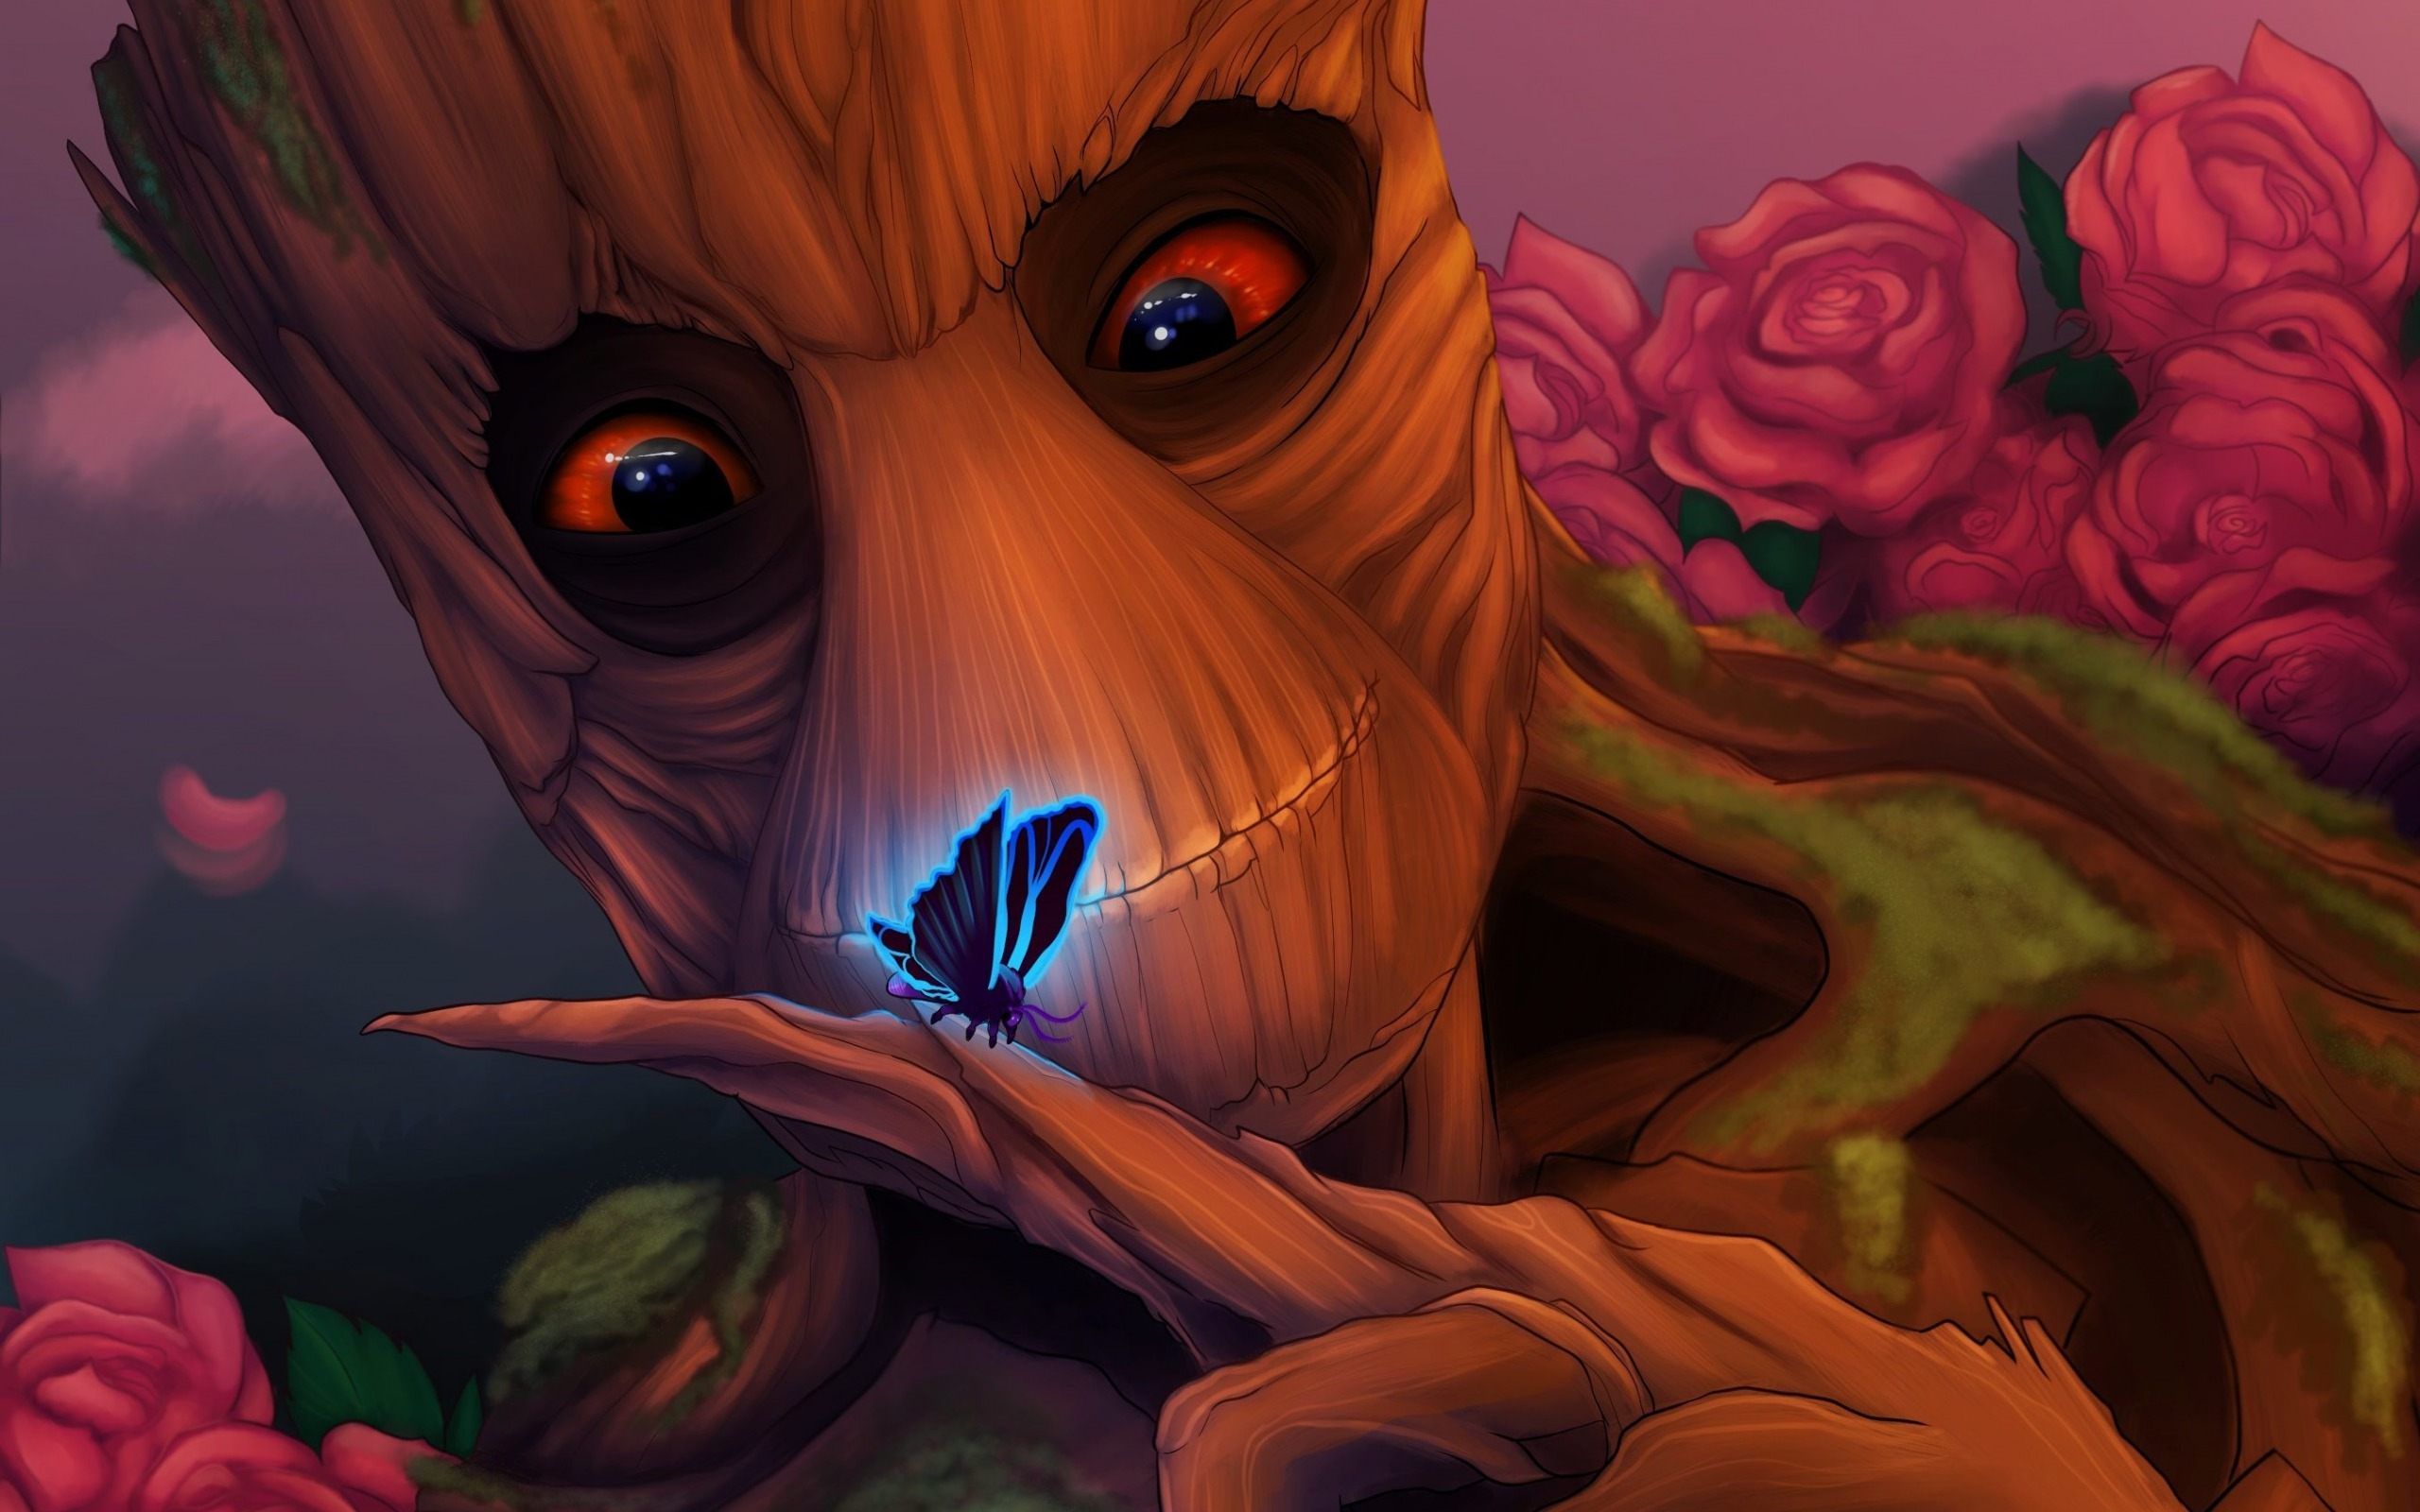 Groot Wallpaper. Groot Guardians of the Galaxy Wallpaper, Dancing Groot Wallpaper and Groot Pot Wallpaper